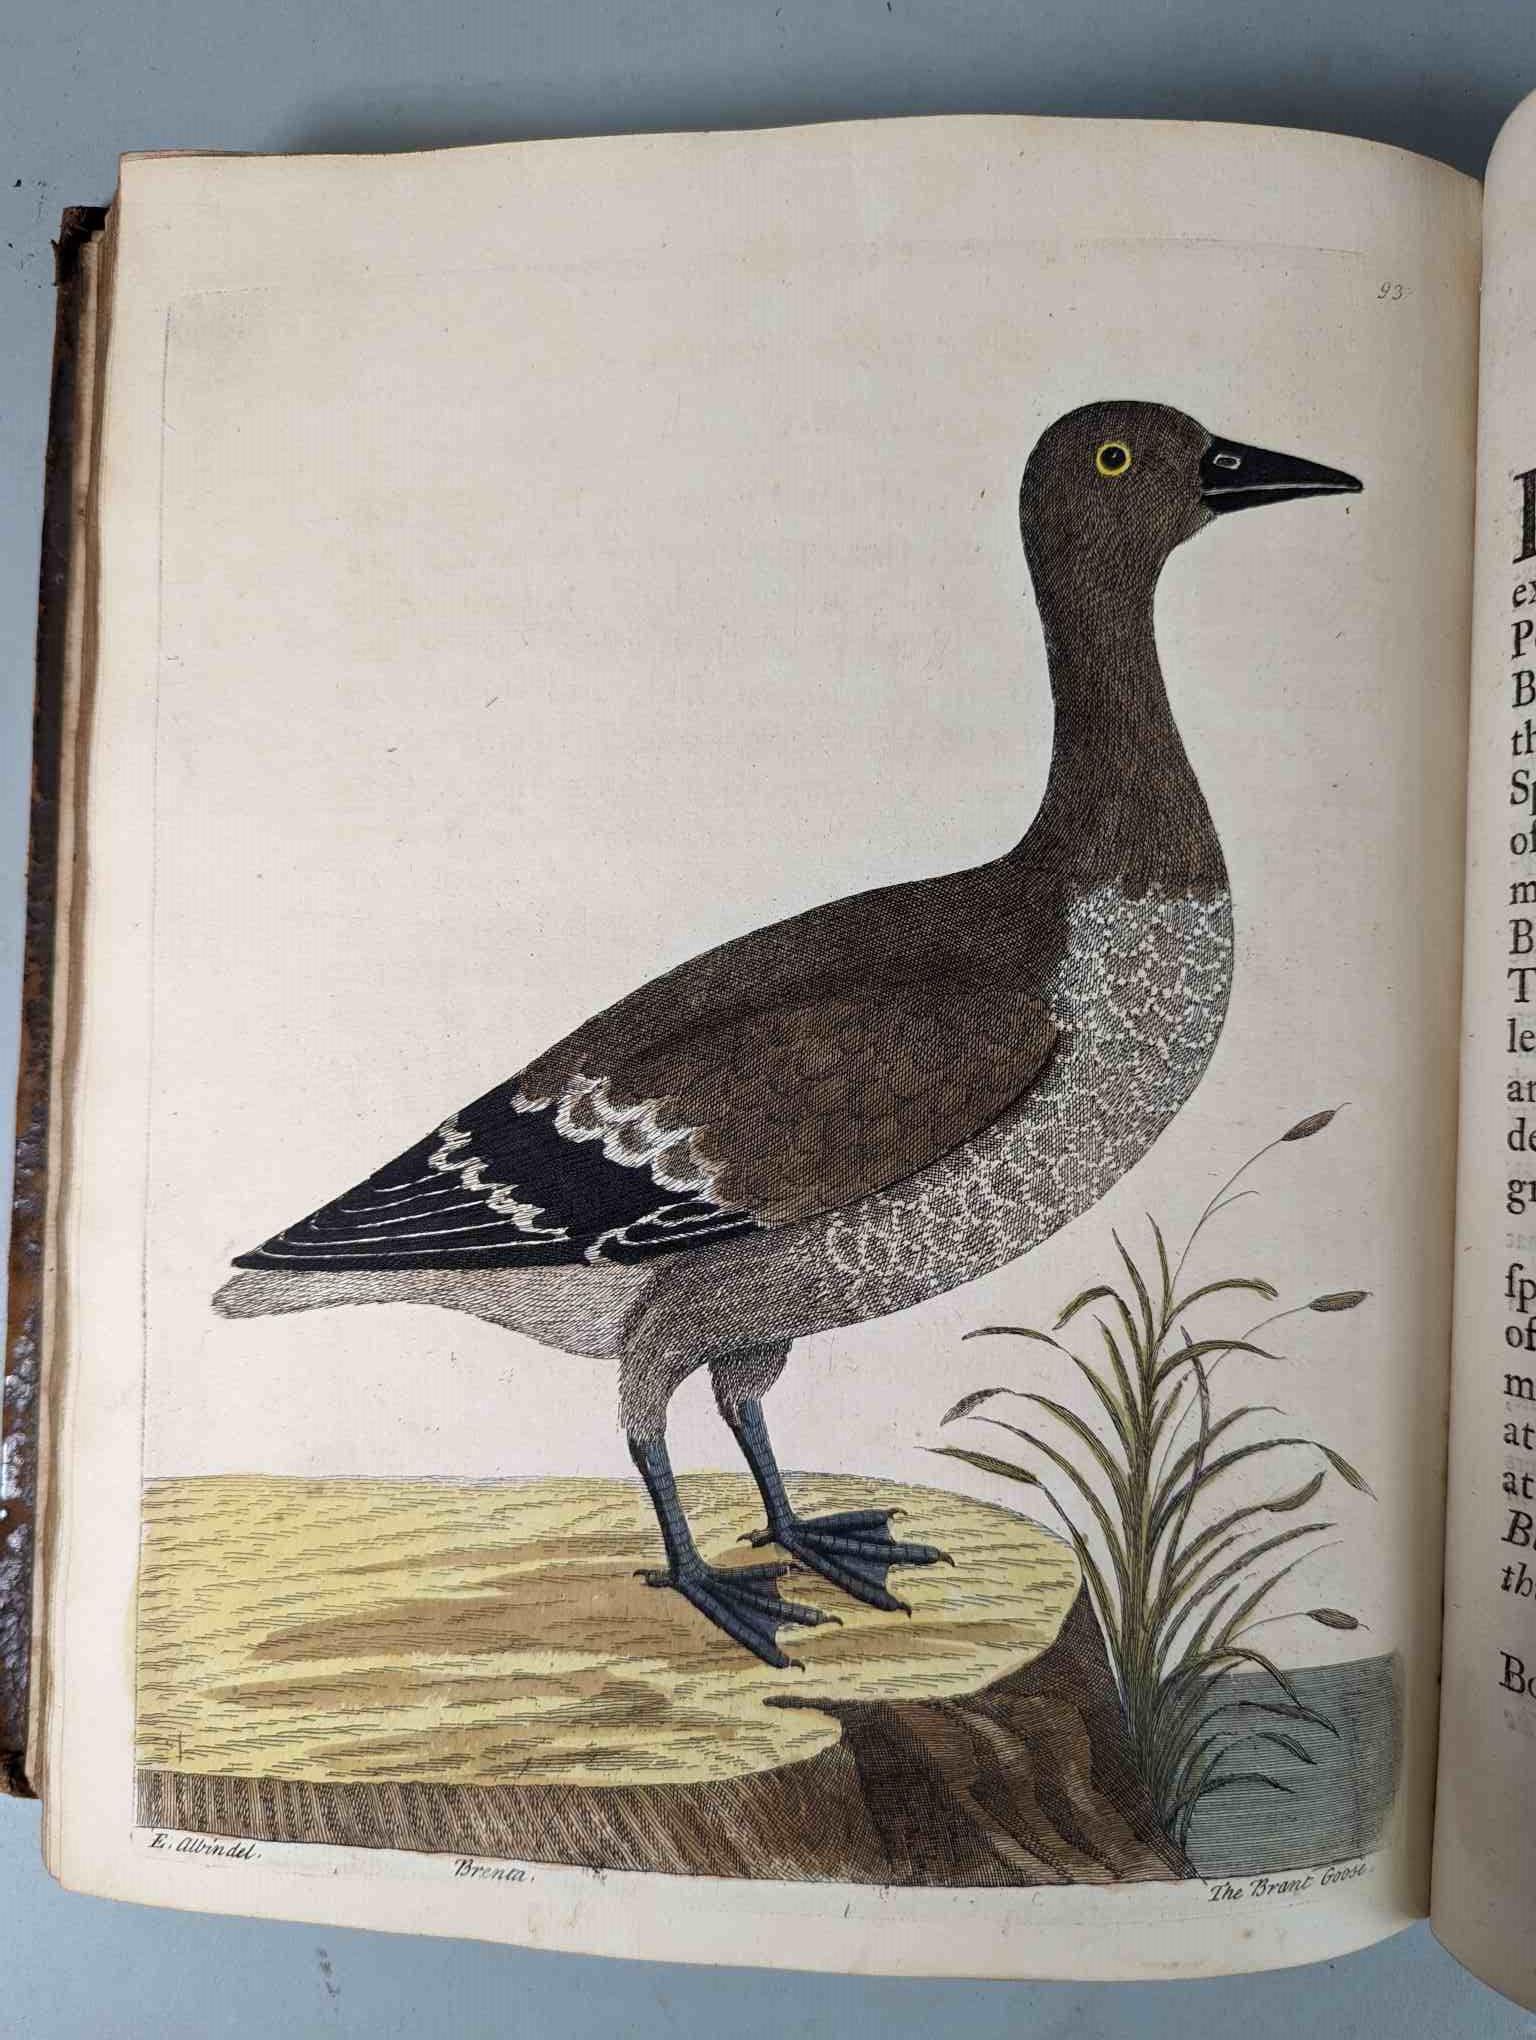 ALBIN, Eleazar. A Natural History of Birds, to which are added, Notes and Observations by W. - Image 96 of 208